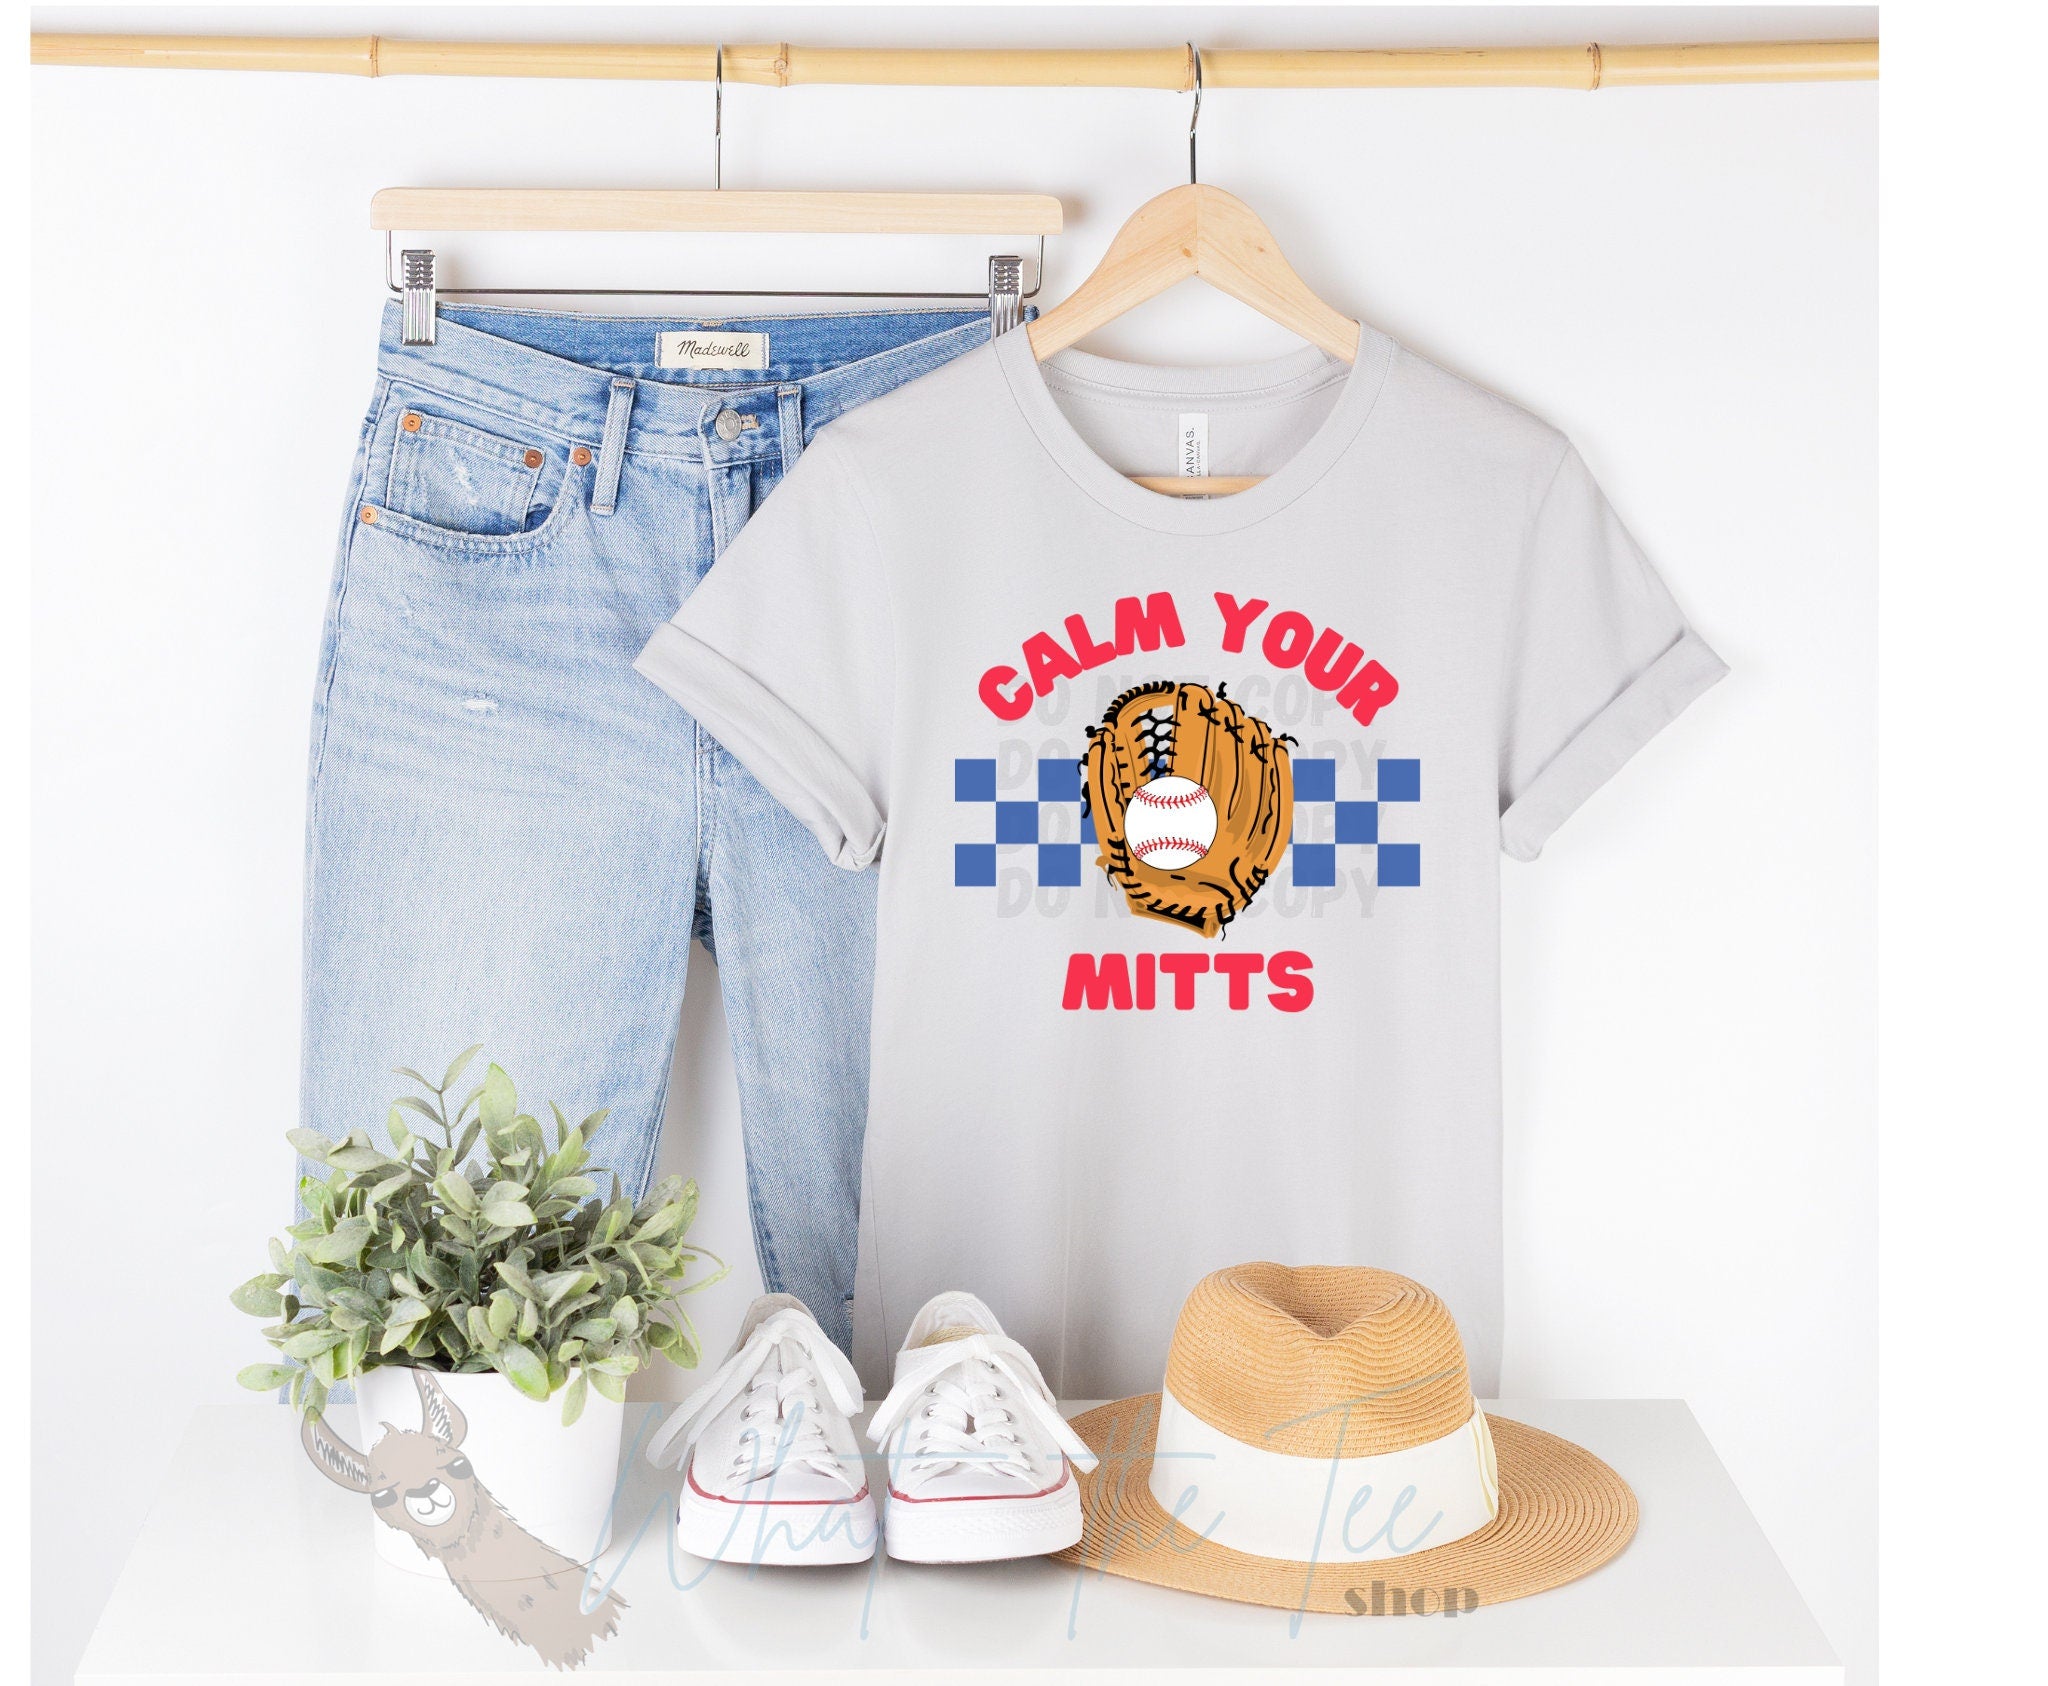 Calm Your Mitts  Graphic Tee